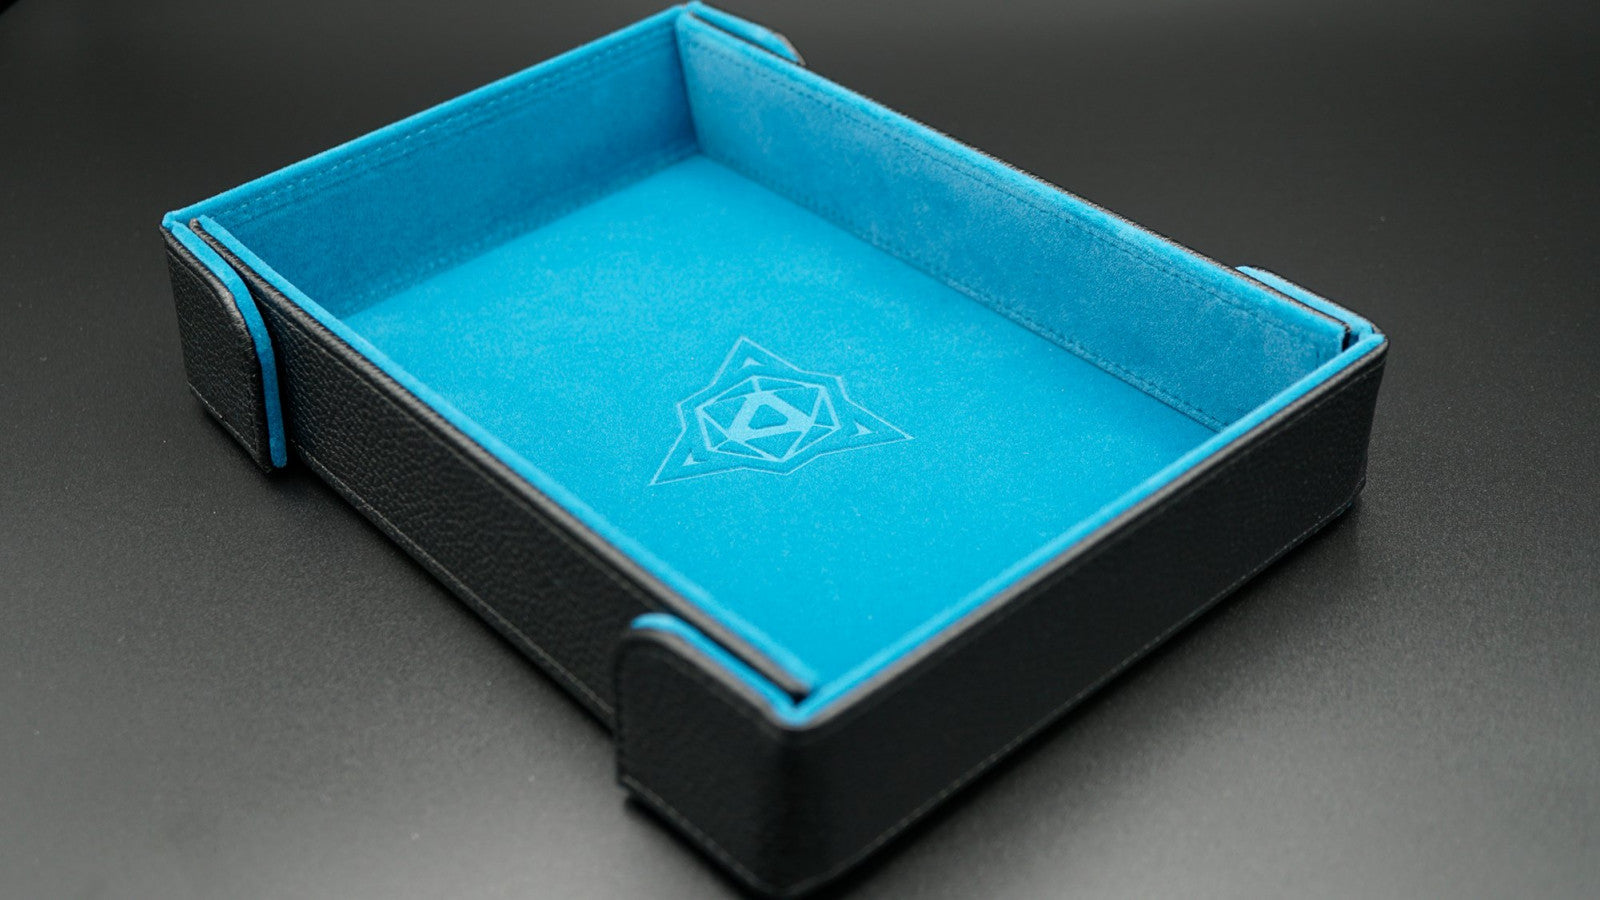 Die Hard Dice Folding Rectangle Tray - Teal Velvet Dice Tray Lets Play Games   